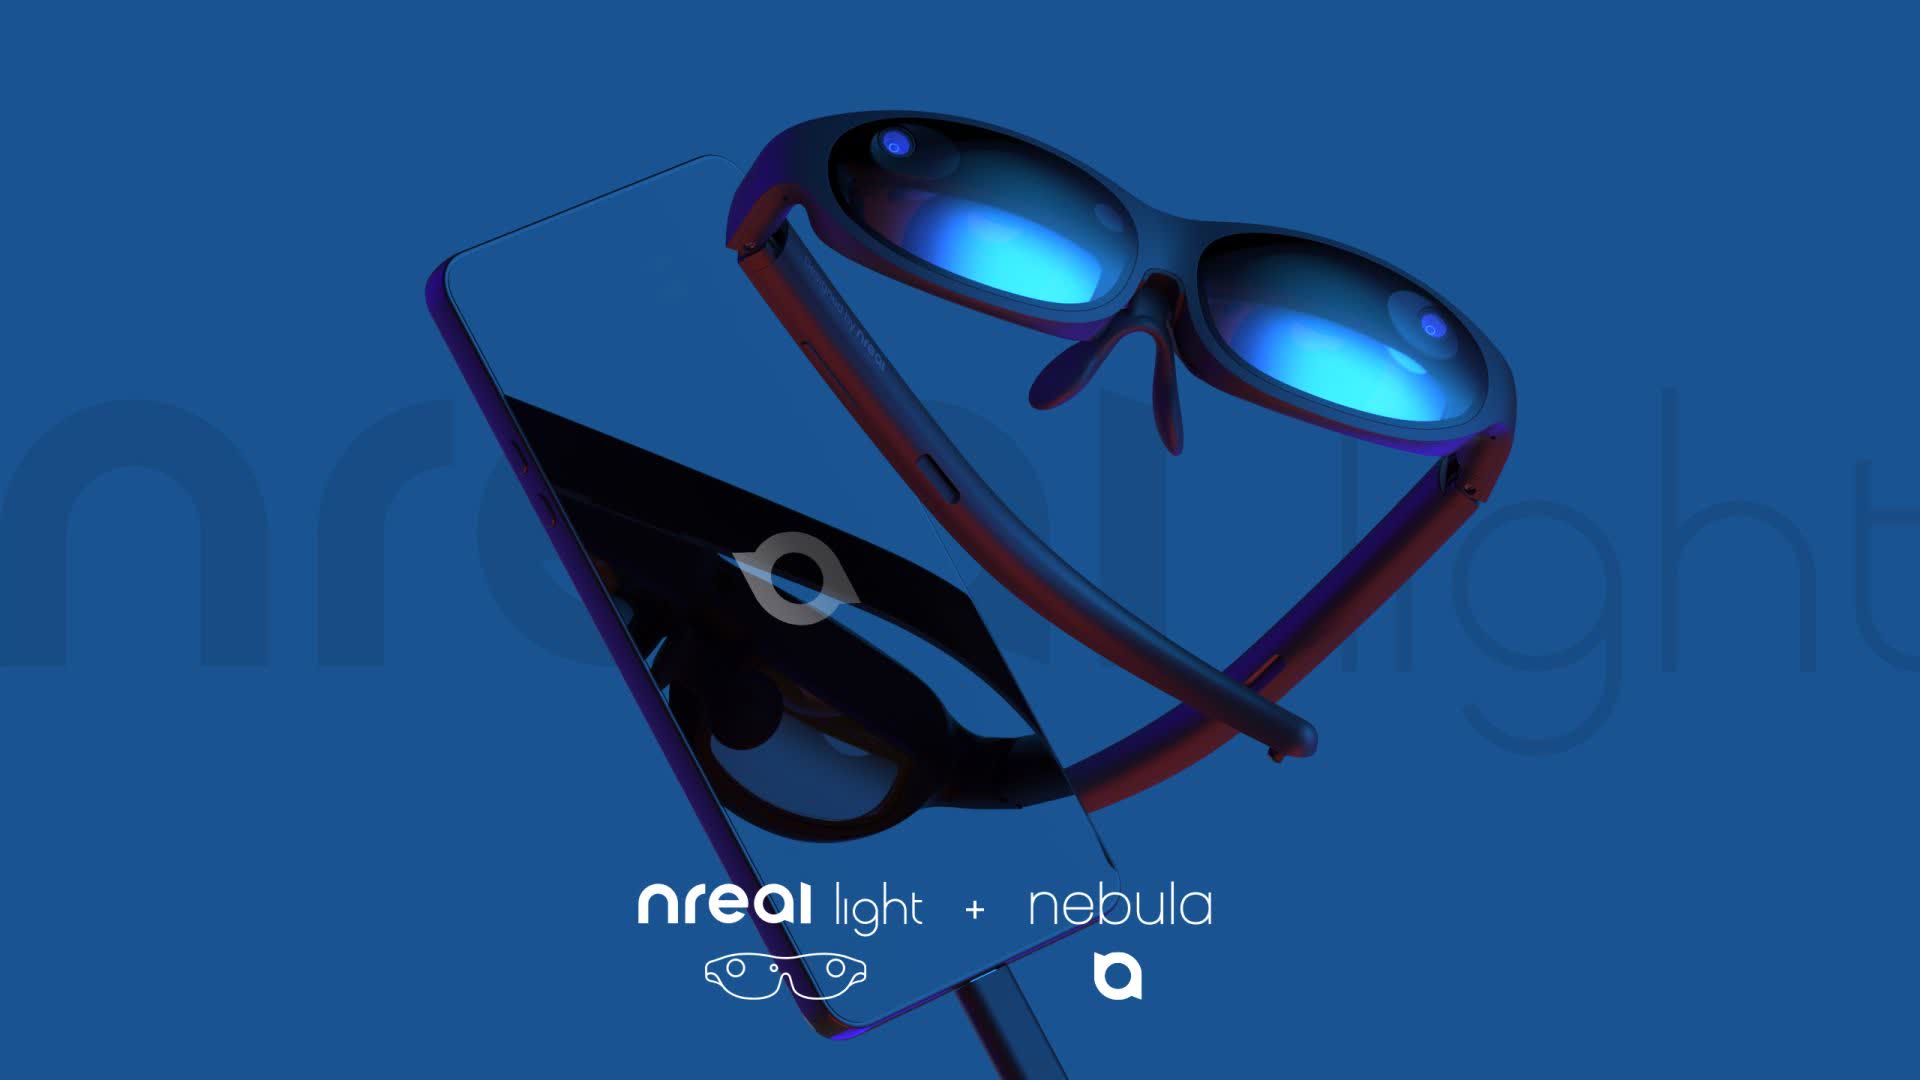 Nreal partners with Vodafone to launch mixed reality glasses in Europe